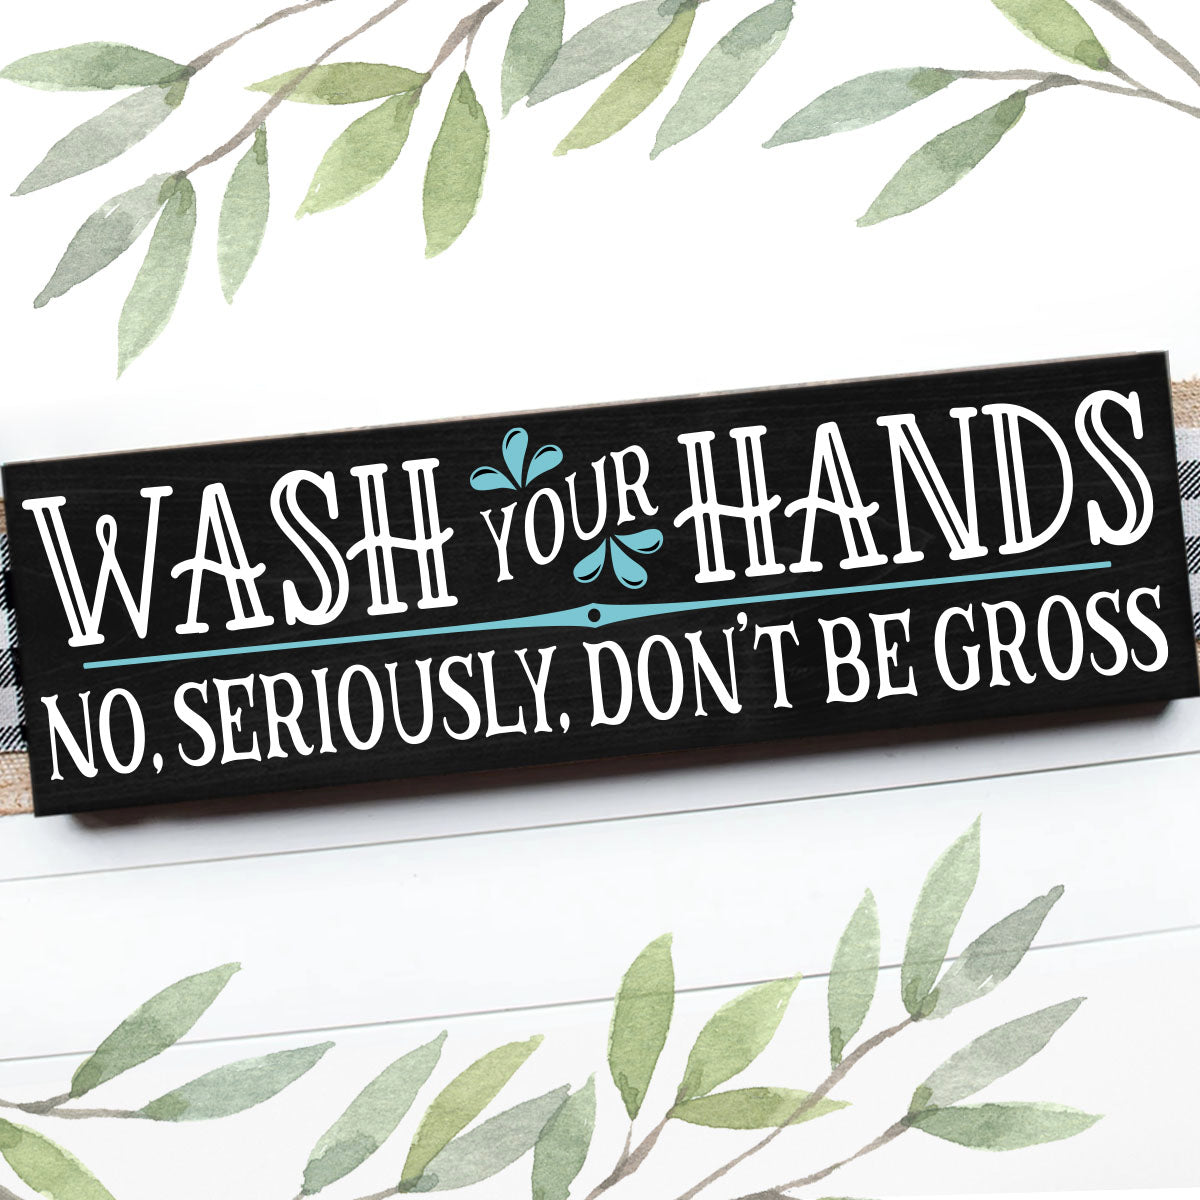 WASH YOUR HANDS, DON'T BE GROSS